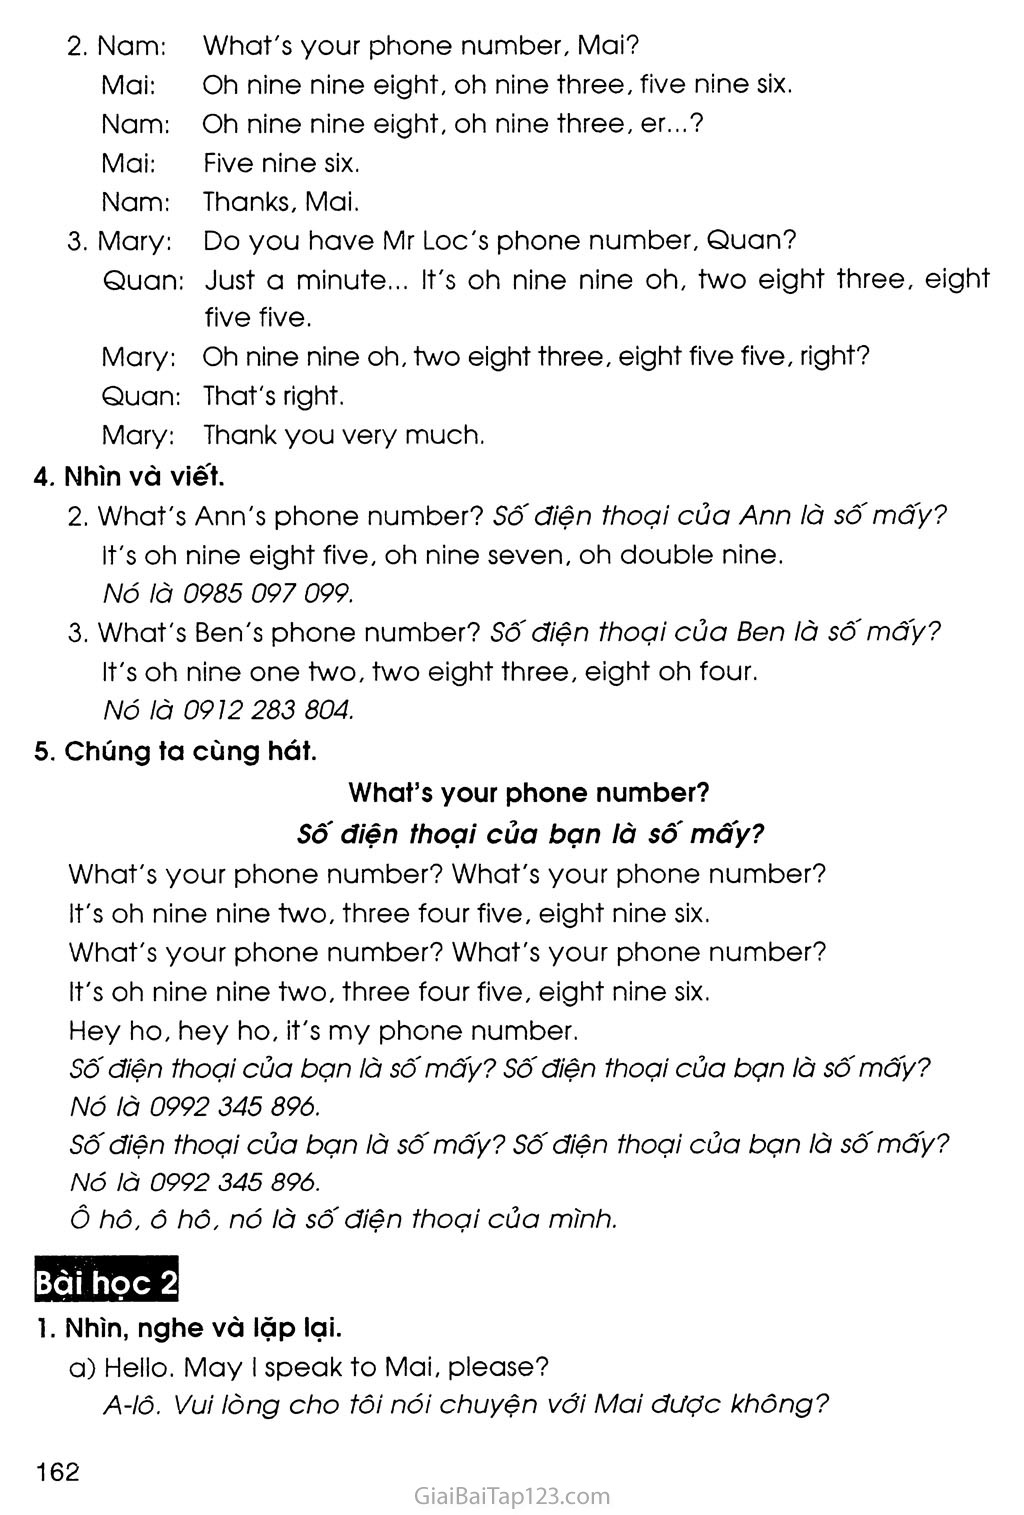 UNIT 18: WHAT’S YOUR PHONE NUMBER? trang 5